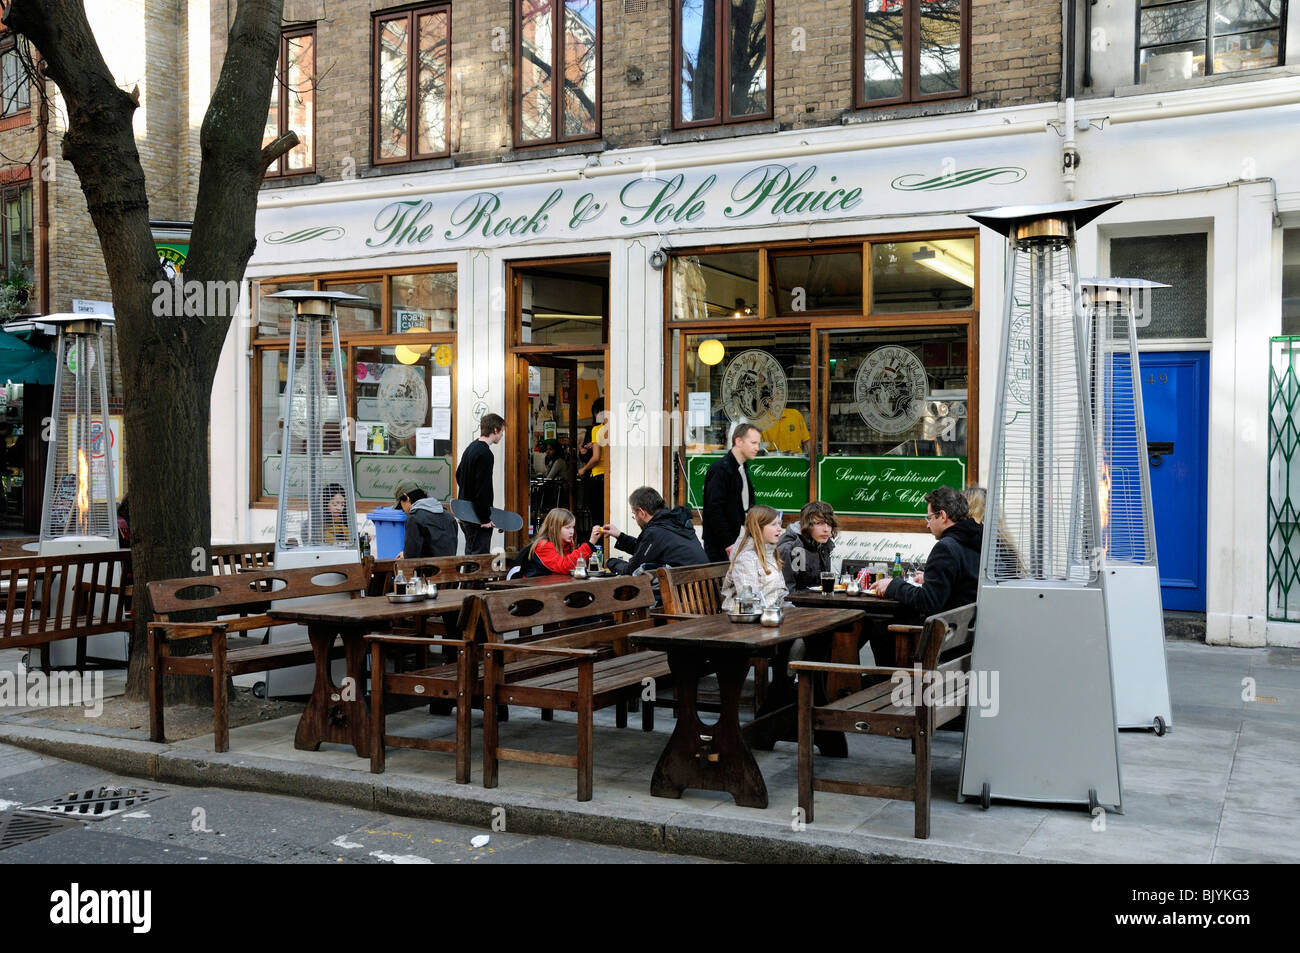 The Rock & Sole Place, fish resturant, Covent Garden London England UK  Stock Photo - Alamy